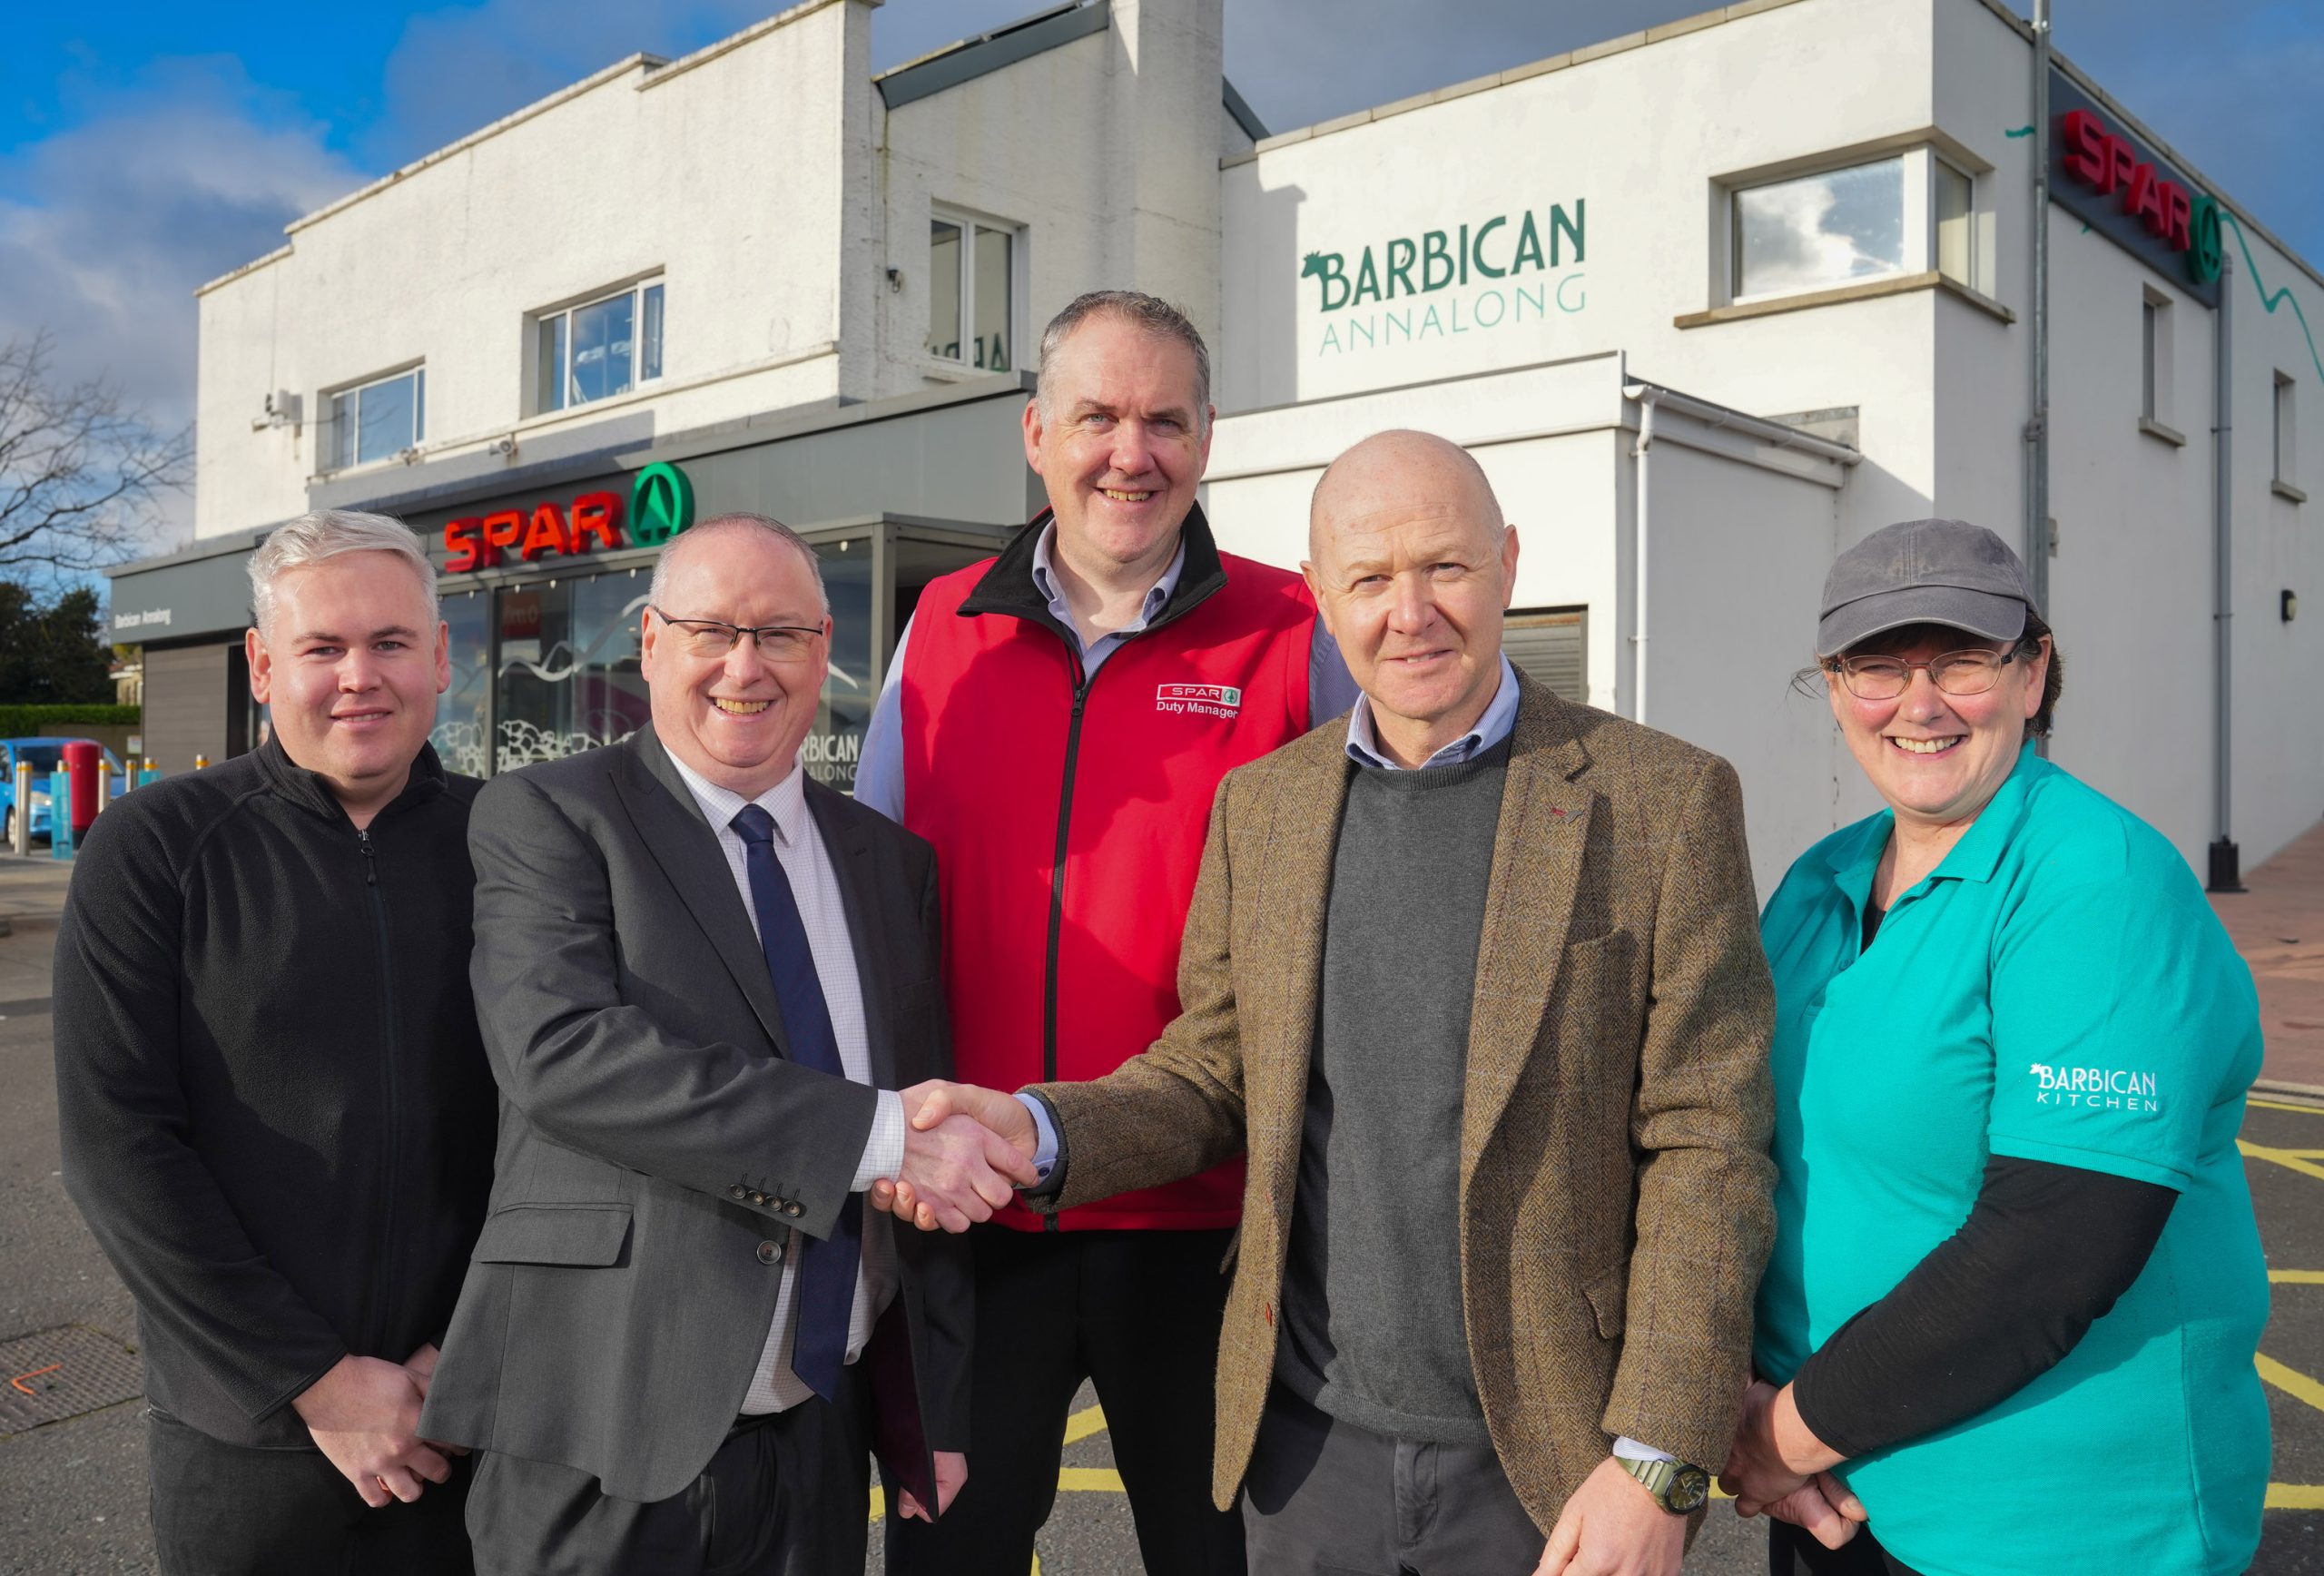 Henderson Retail acquires two neighbourhood stores building on foundations set by local retailers